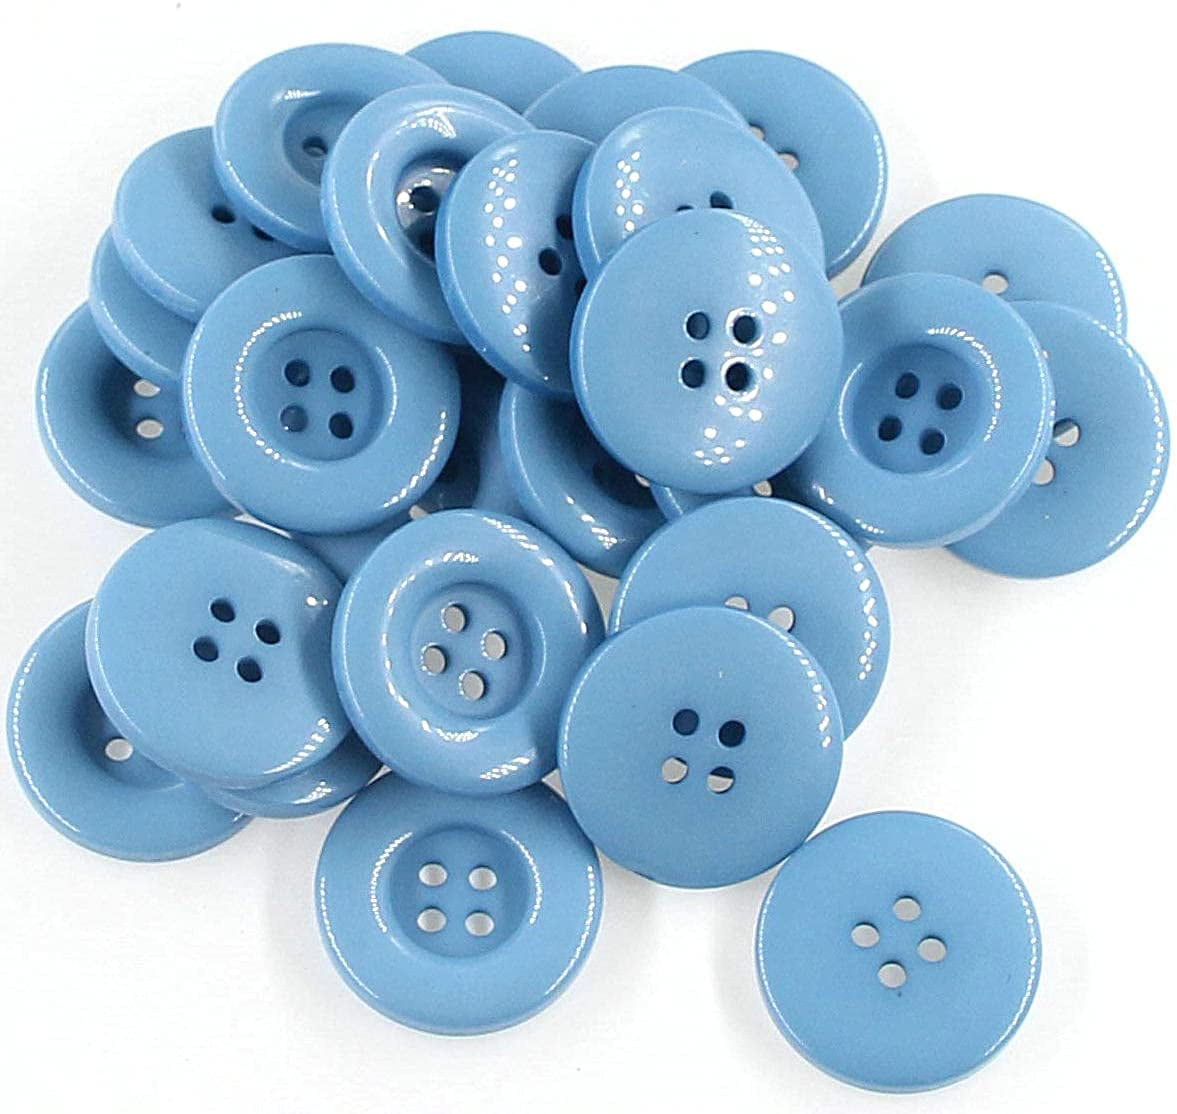 SCRAPBOOKING 50 x STAR 2 HOLE RESIN SEWING BUTTONS CRAFT ETC., 